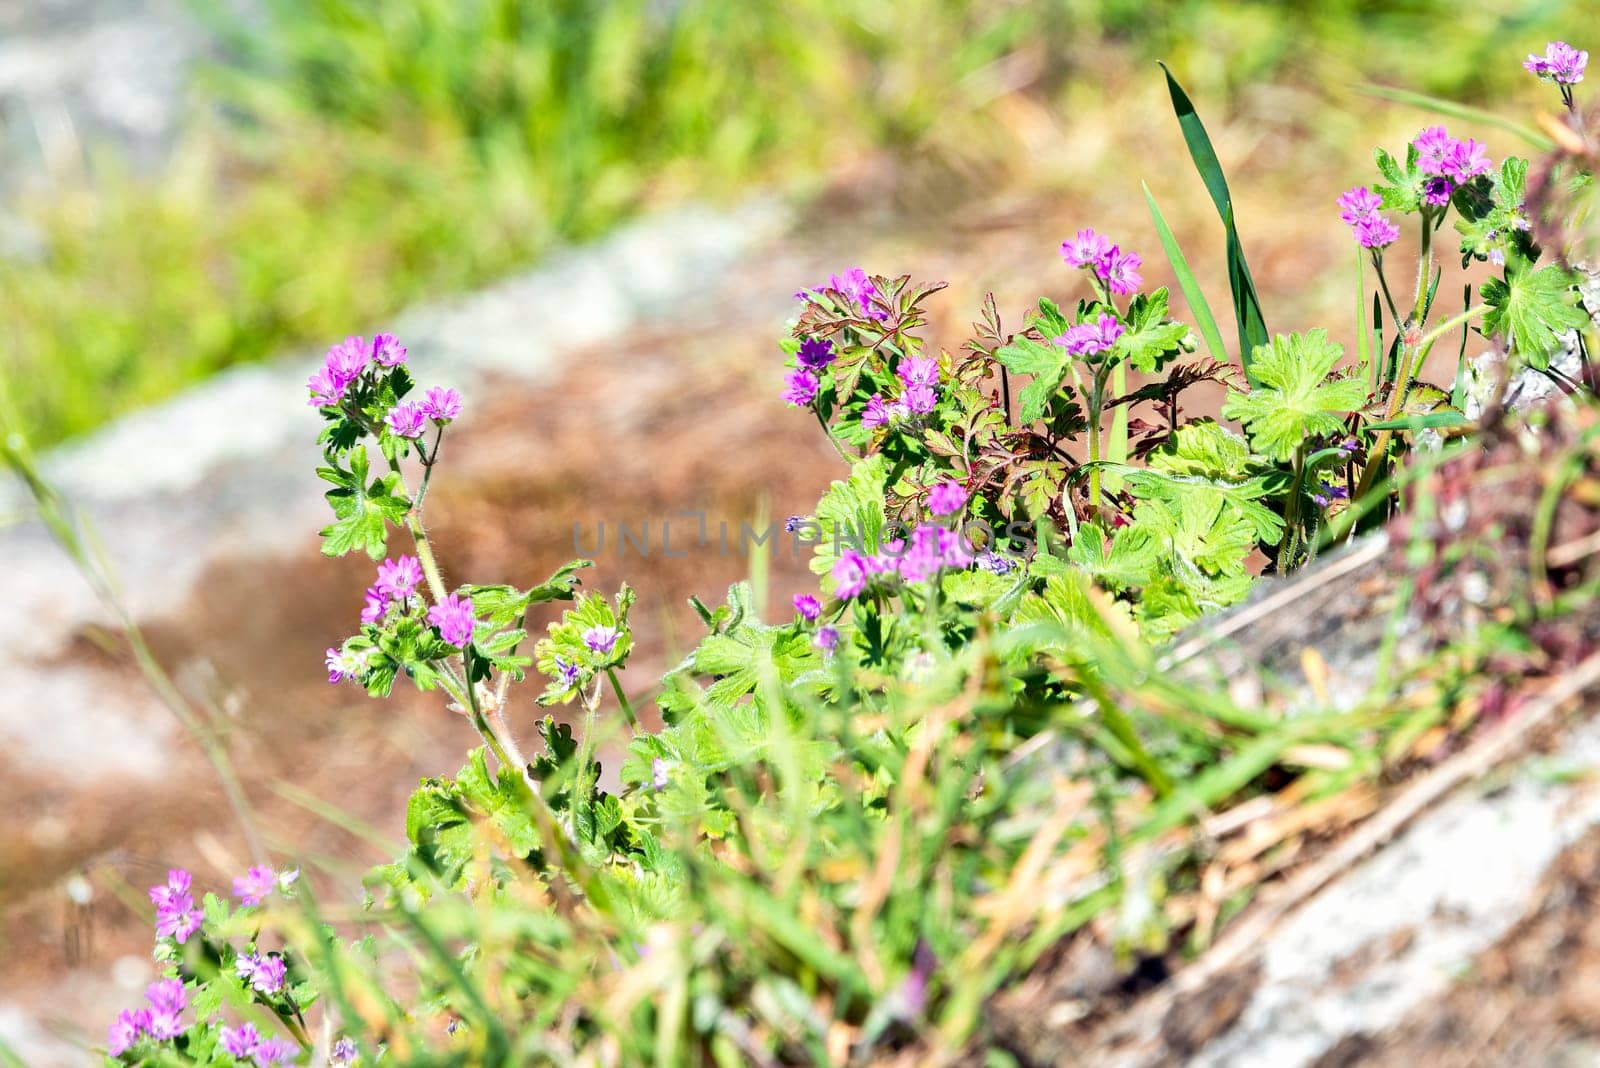 Small lilac flowers blossoming under sun light on steep rocky slope.